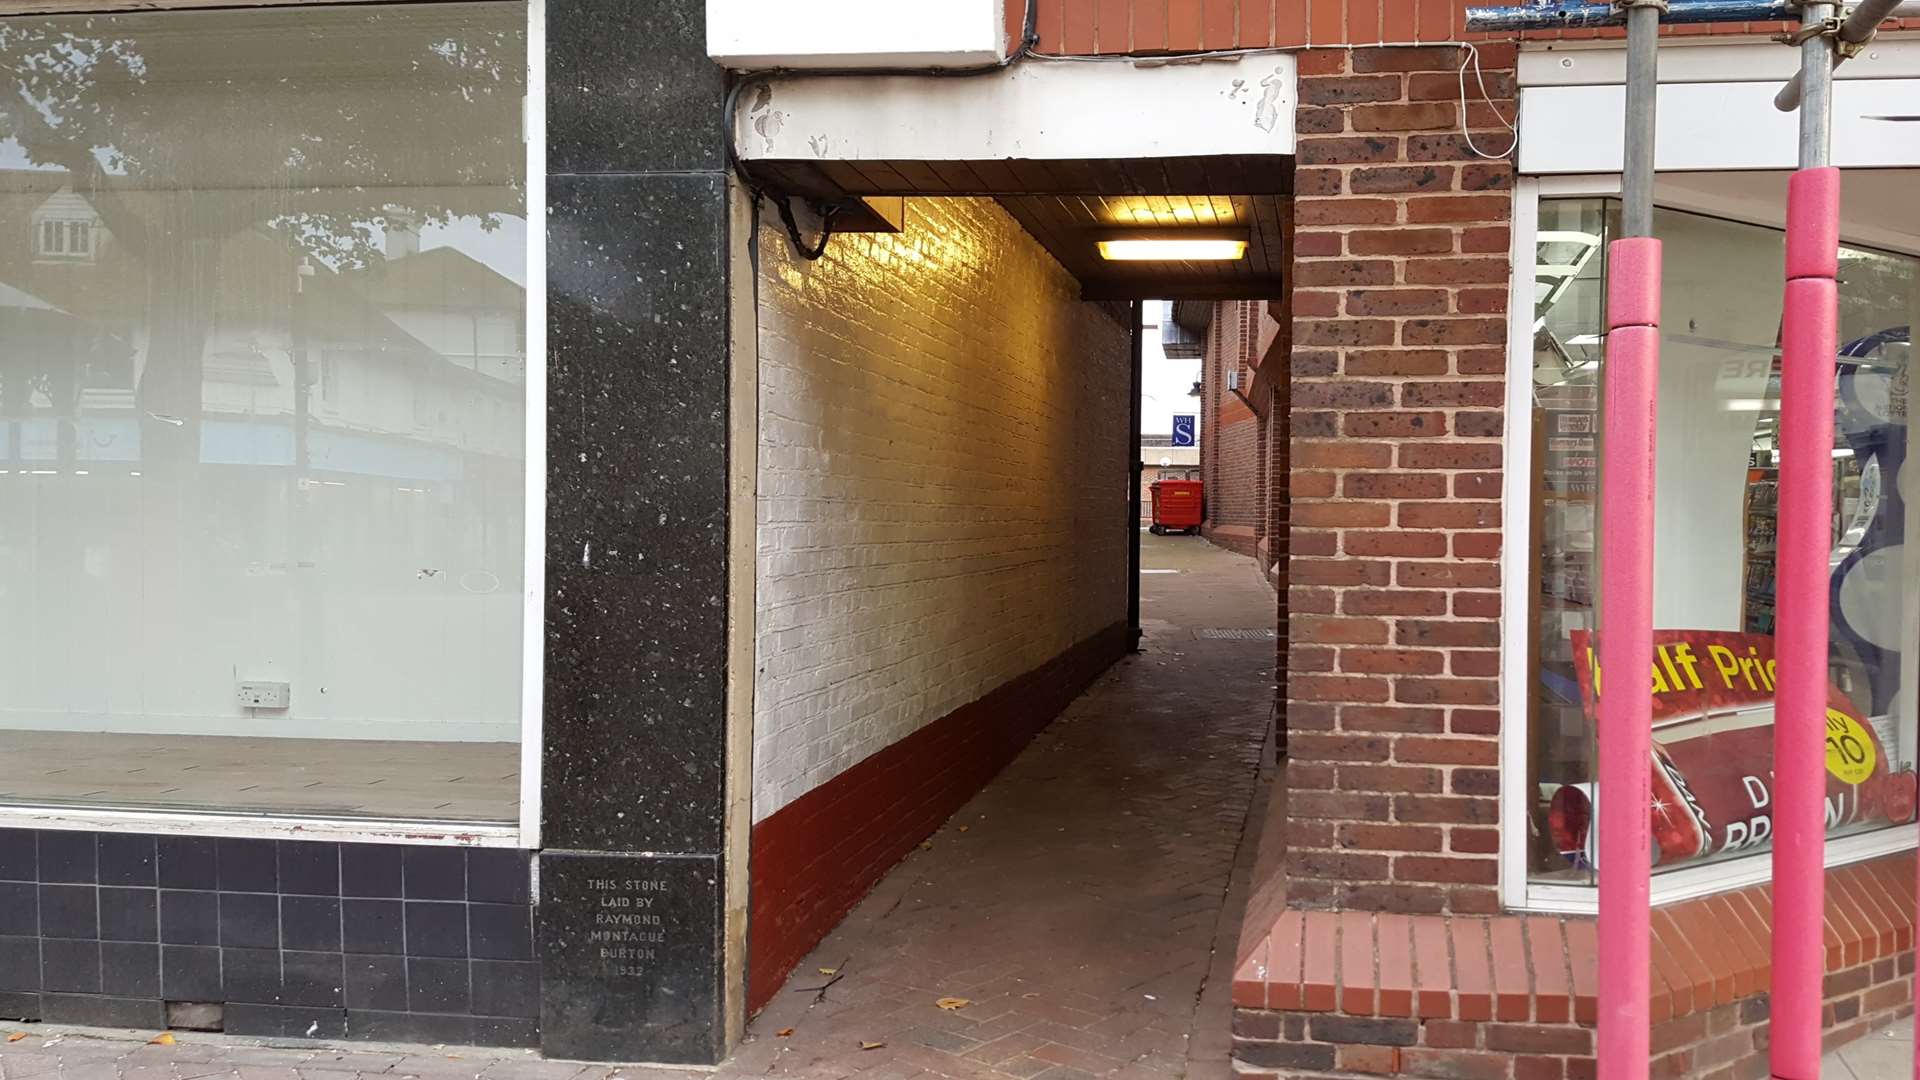 The passage links the High Street to the taxi rank outside Wilko